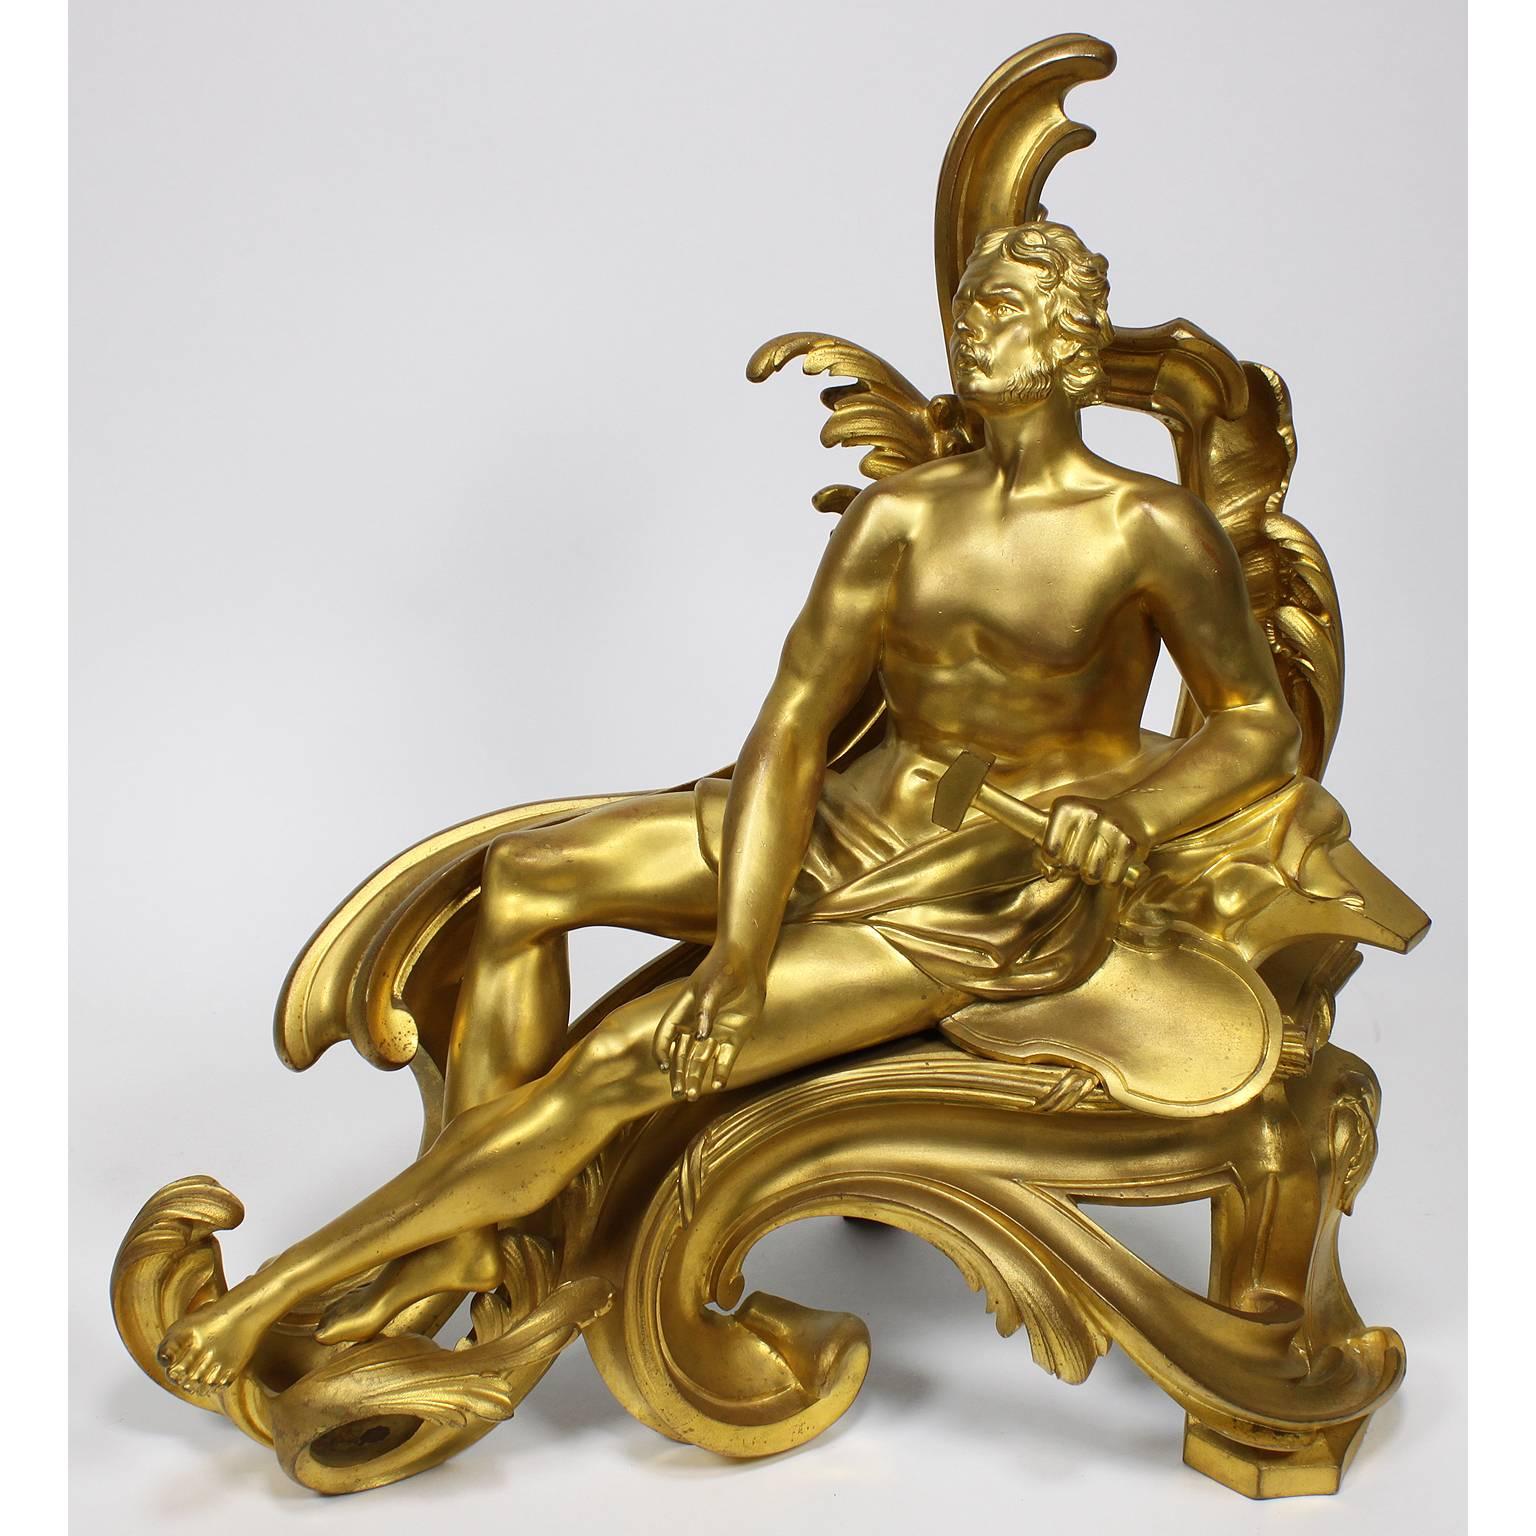 A fine pair of French 19th century Louis XV style gilt bronze figural chenets (Andirons), each depicting a classically draped reclining figure, one male holding a Hammer and the other a nude female feeding a bird, both on a scrolled foliate cast